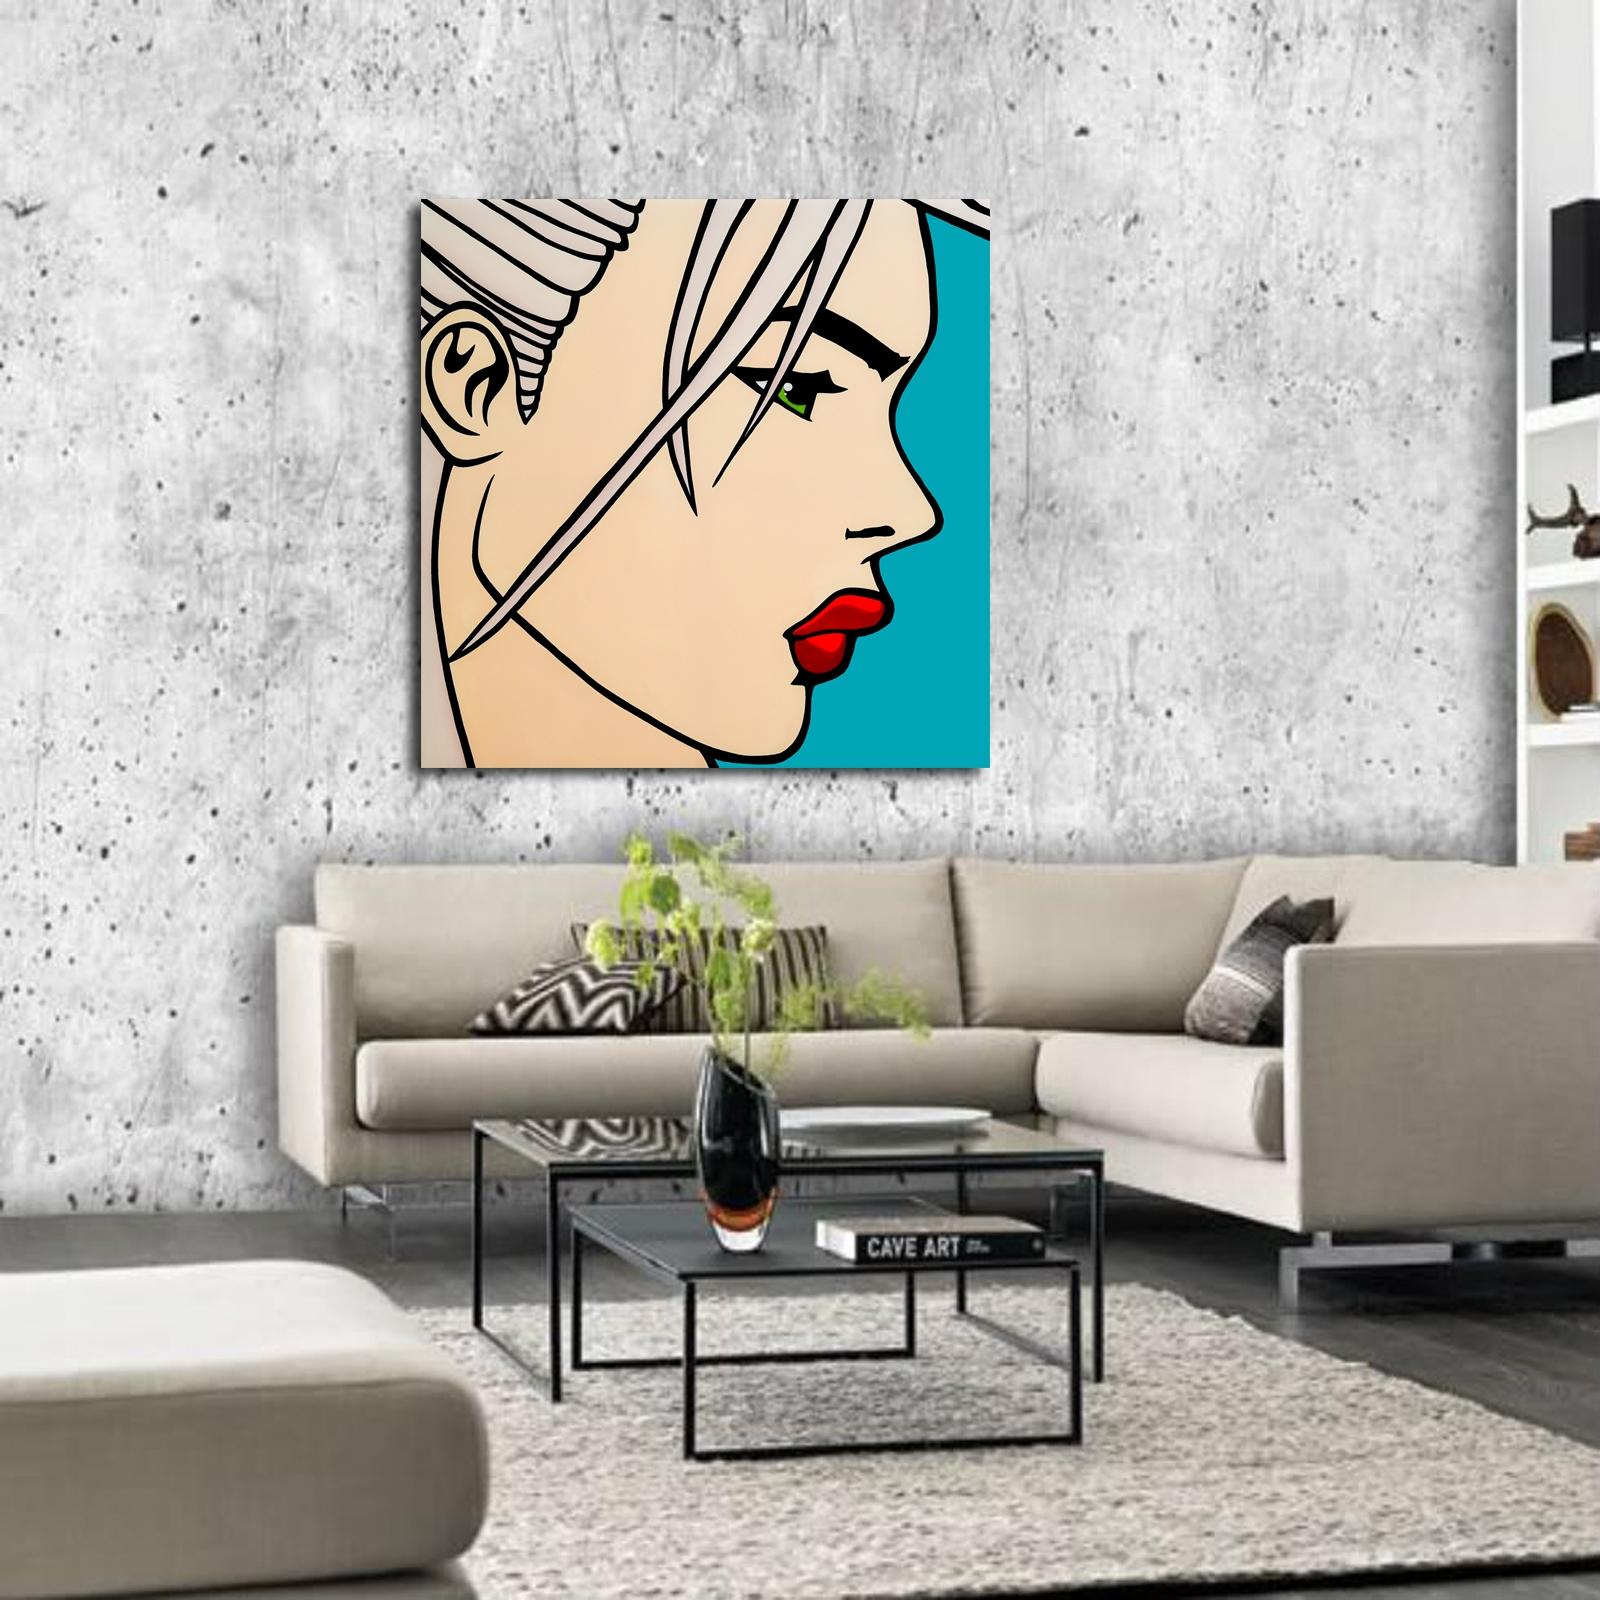 The best in original abstract art, pop art, modern art, sculpture and modern paintings. Large paintings using bright colors and bold lines that make you smile.   ARTIST: Thomas C. Fedro  TITLE: Never Too Late  SIZE: 36